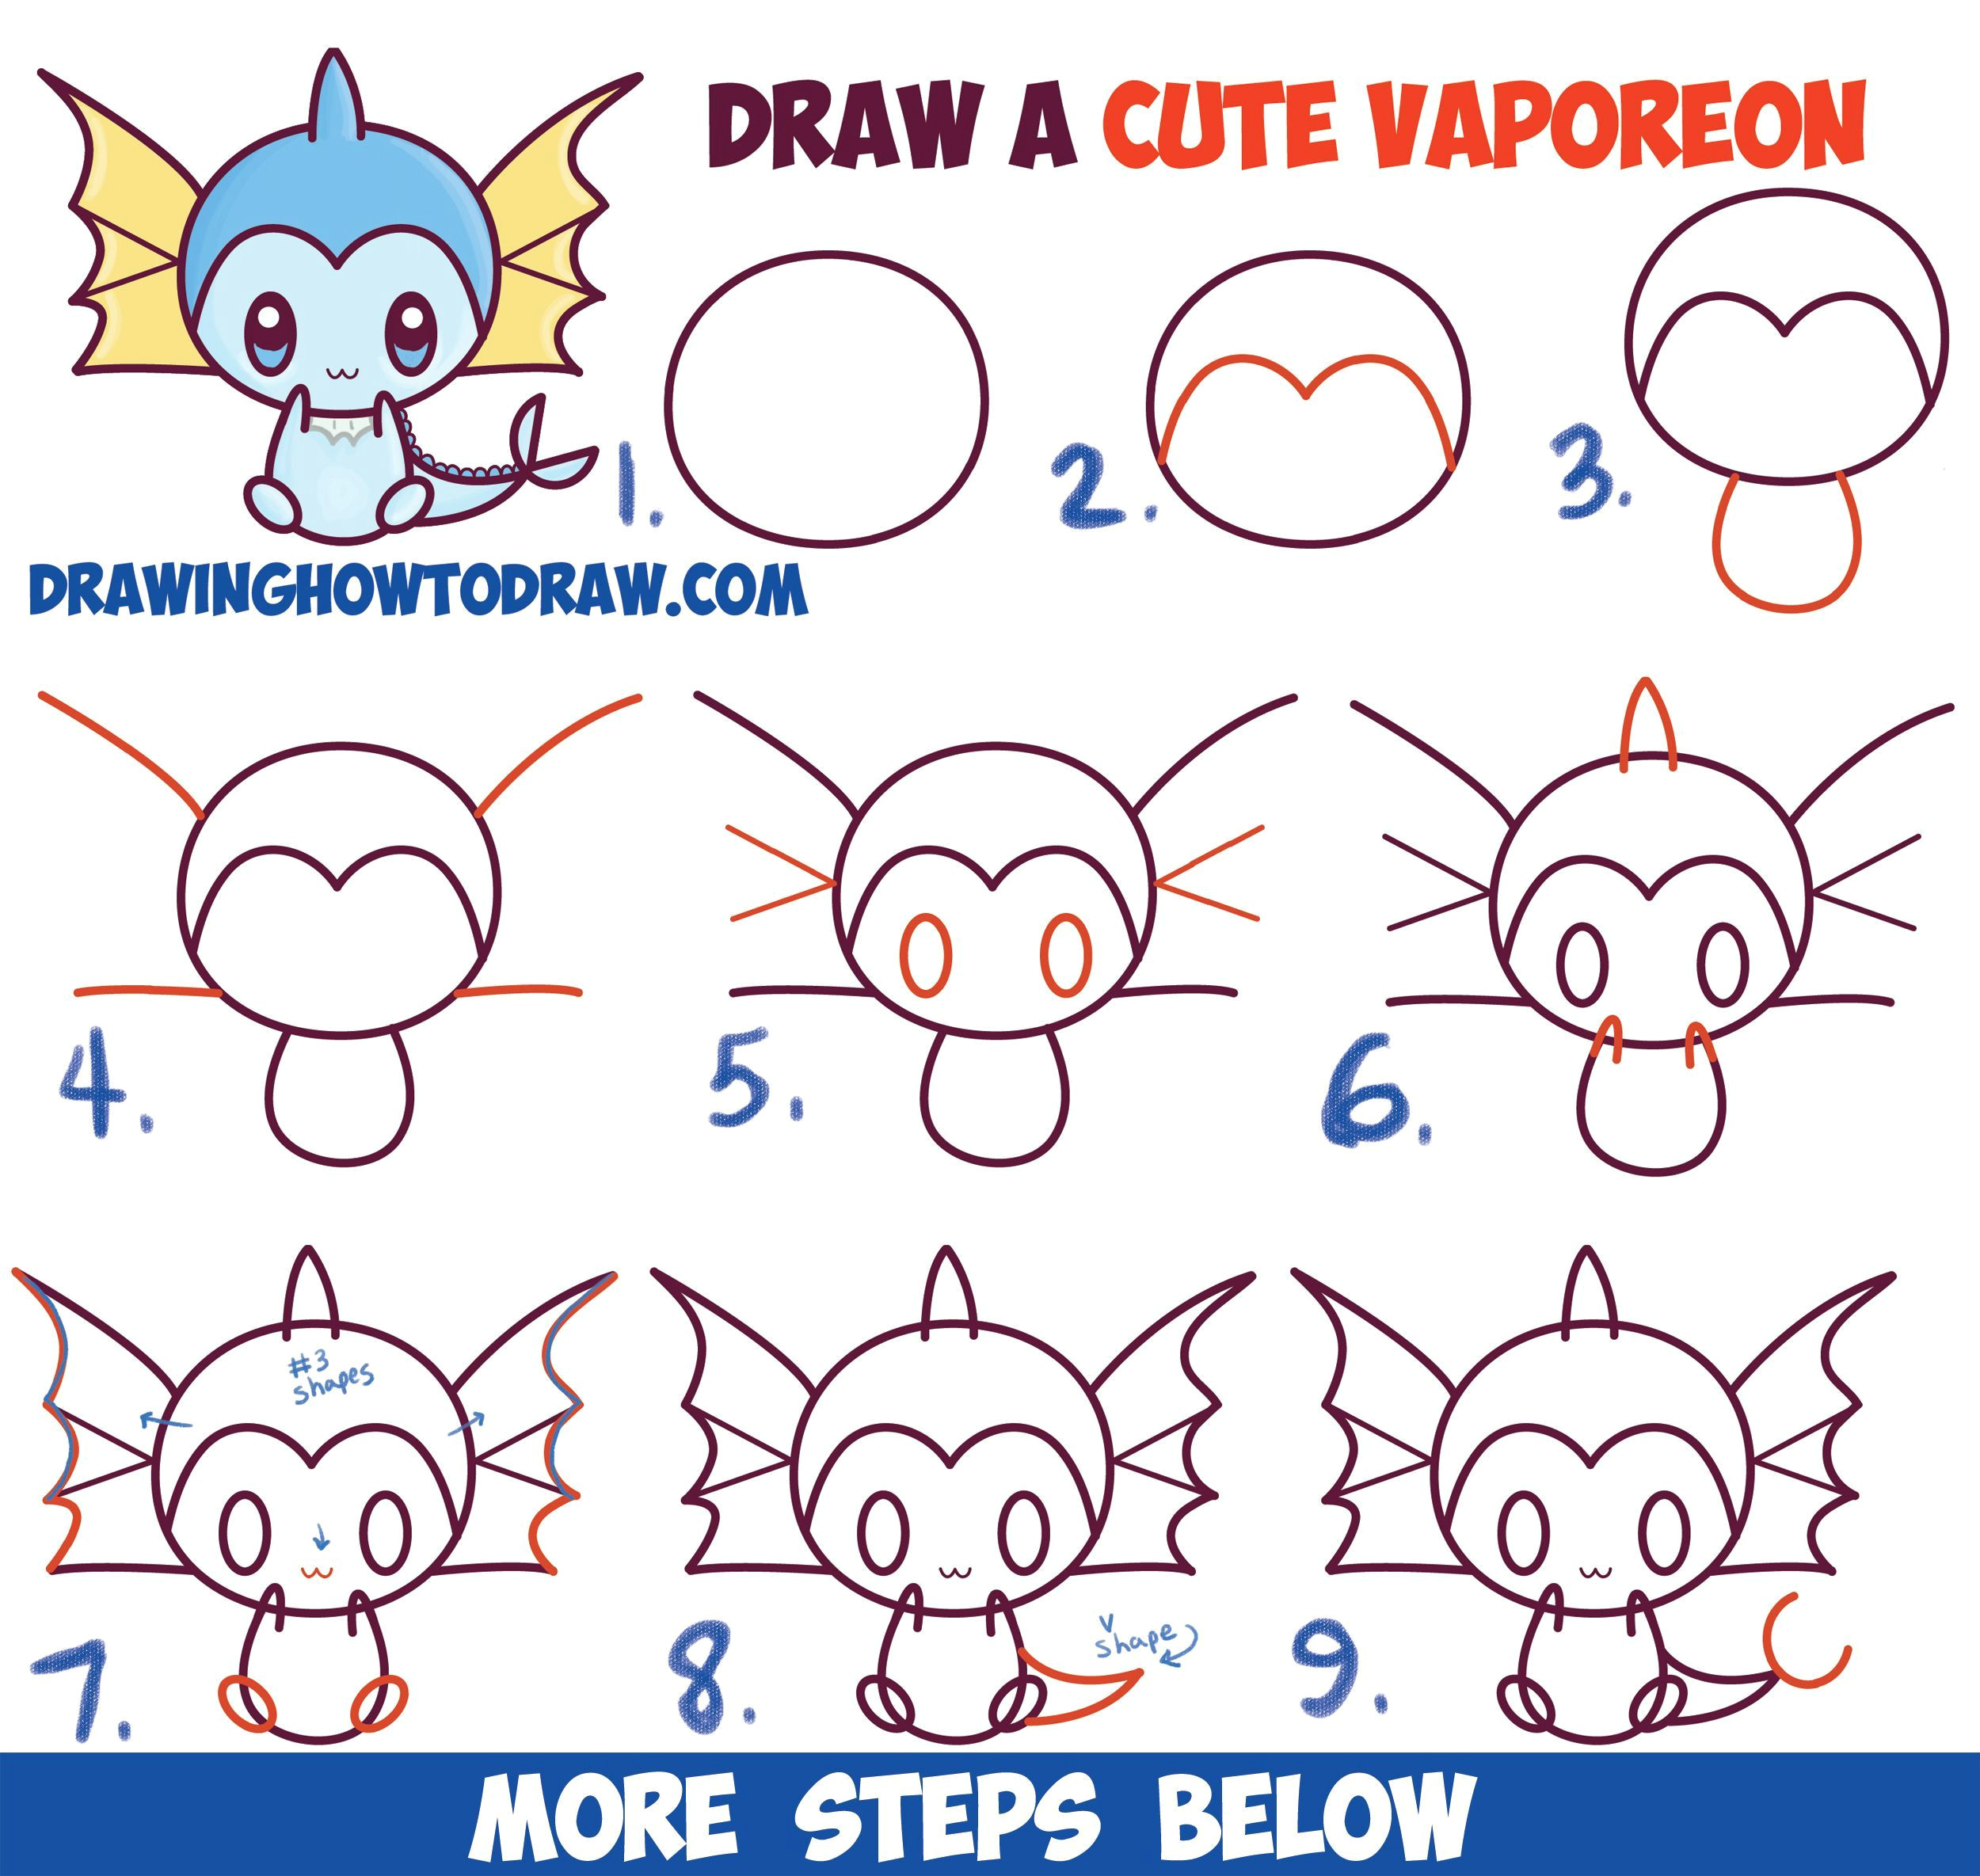 Easy 911 Drawings How to Draw Cute Kawaii Chibi Vaporeon From Pokemon Easy Step by